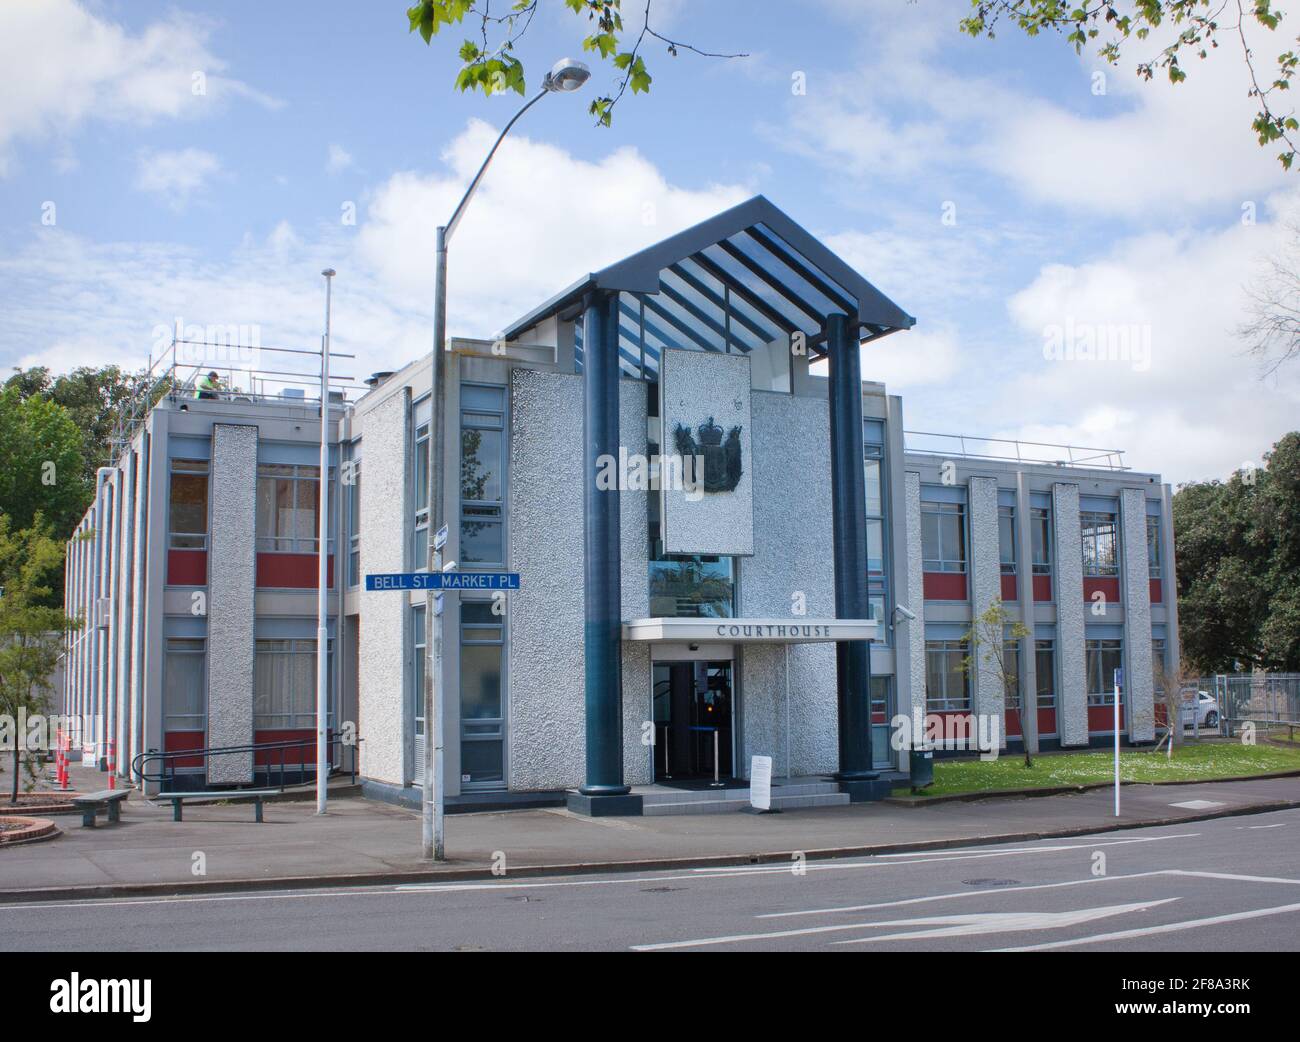 Whanganui, New Zealand - Oct 19th 2017: Whanganui High & District Courts building Stock Photo